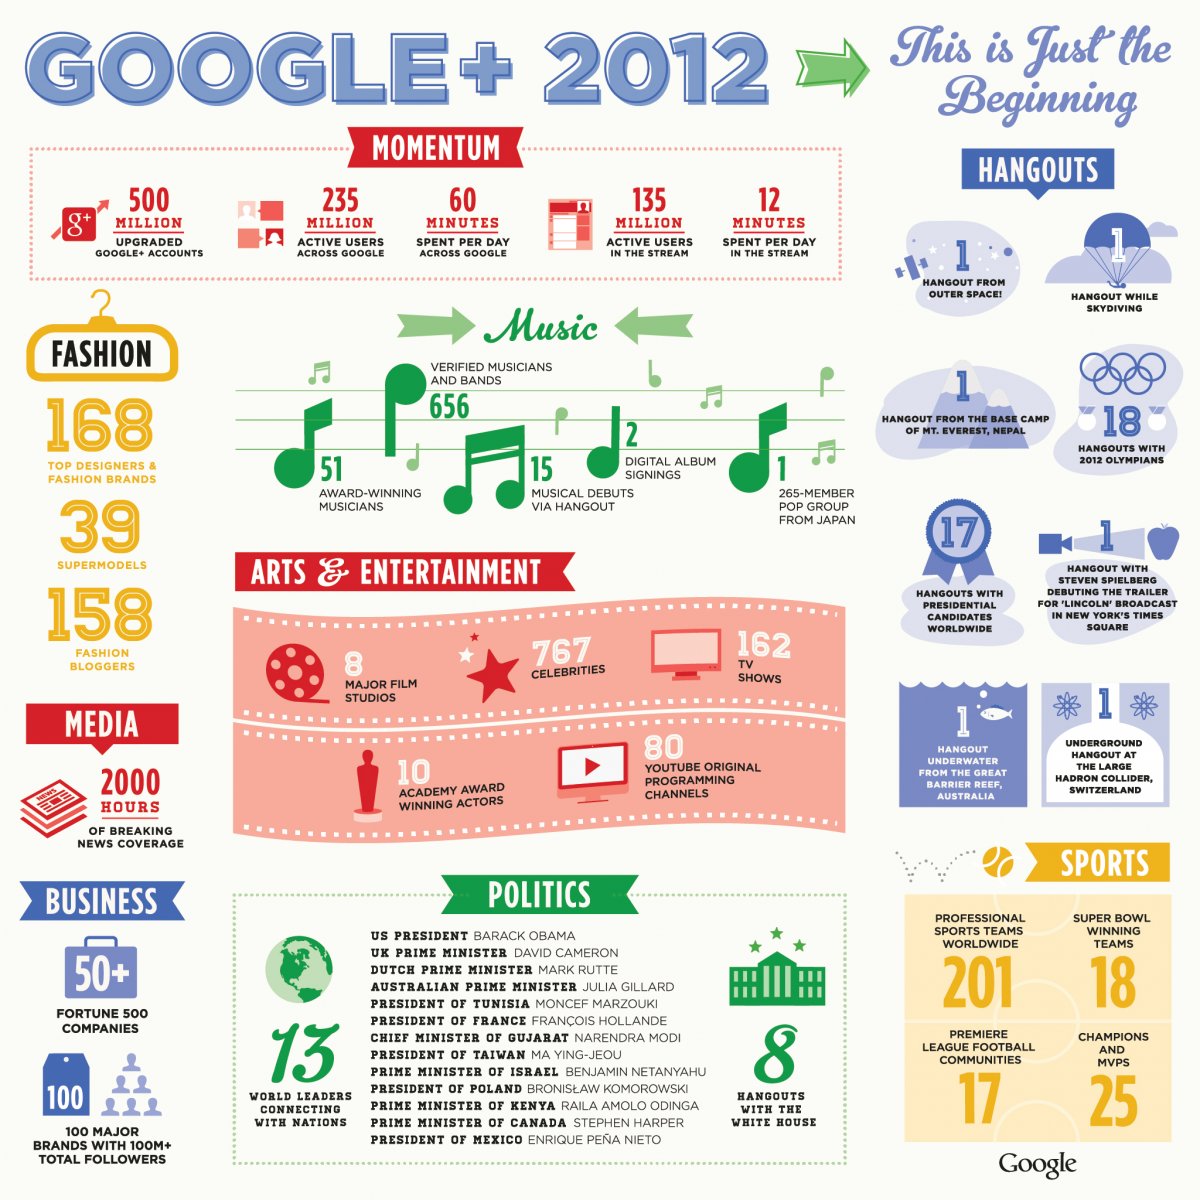 Google+ Infographic - Google+ in numbers